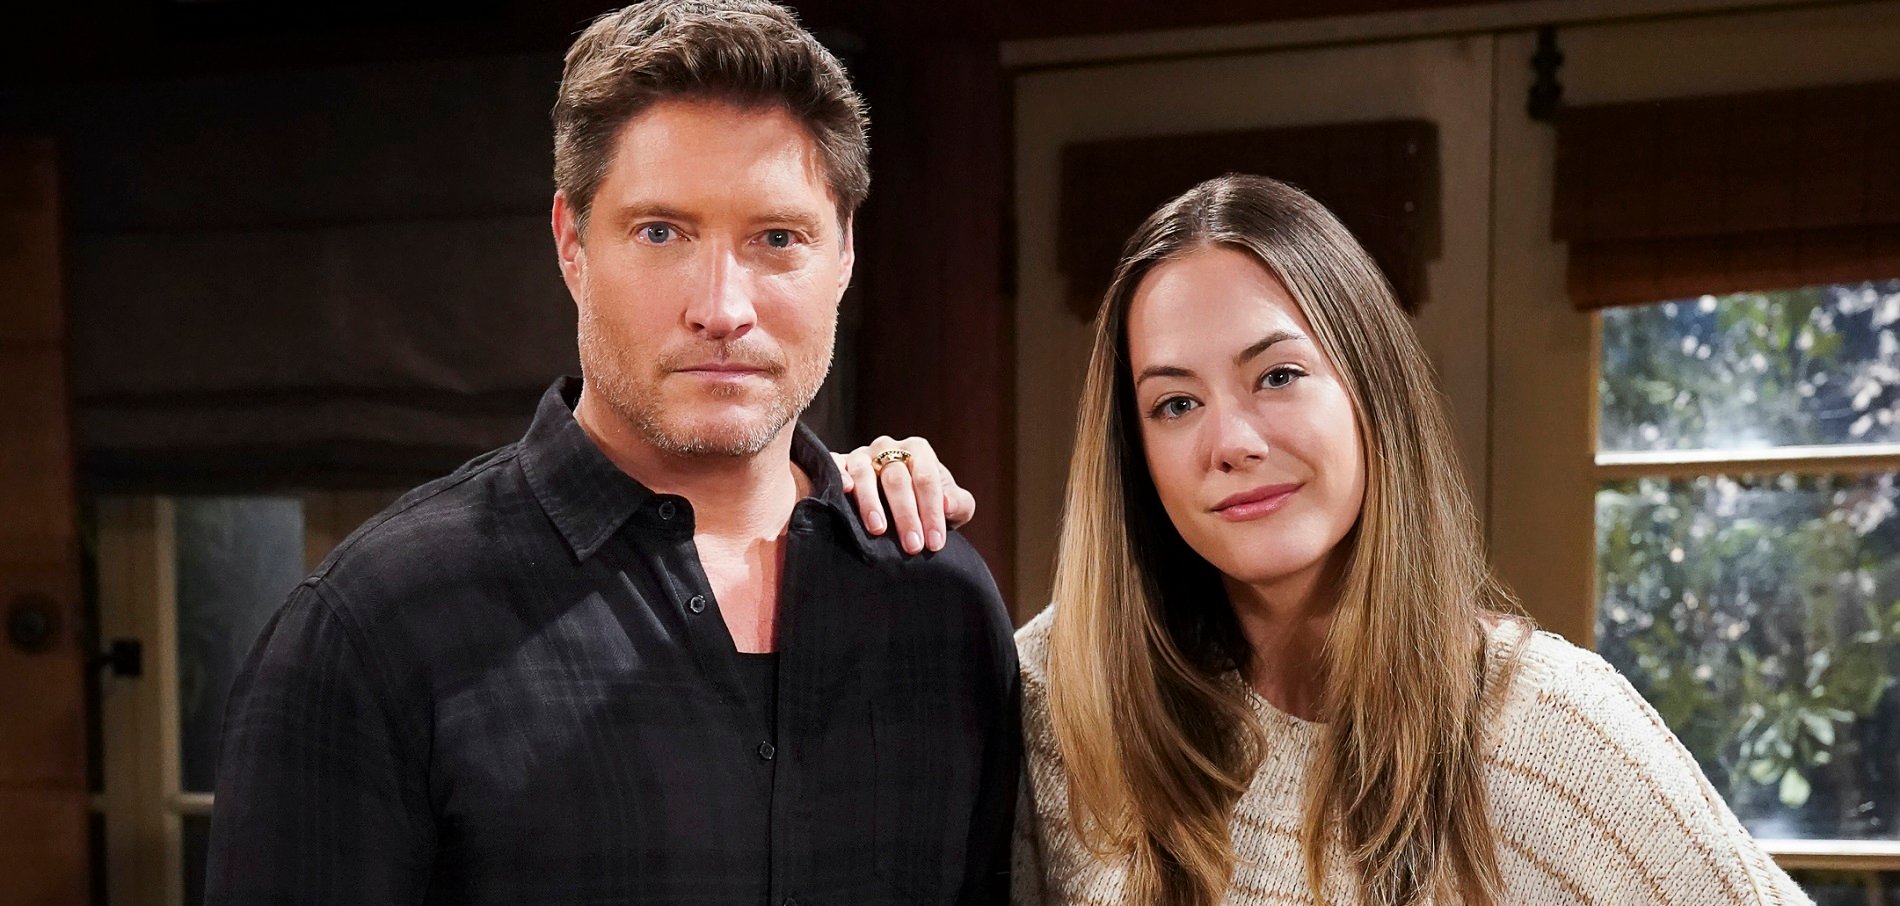 The Bold and the Beautiful weekly recap focuses on Deacon Sharpe, L, in a plaid shirt, and his daughter Hope, R, in a white sweater